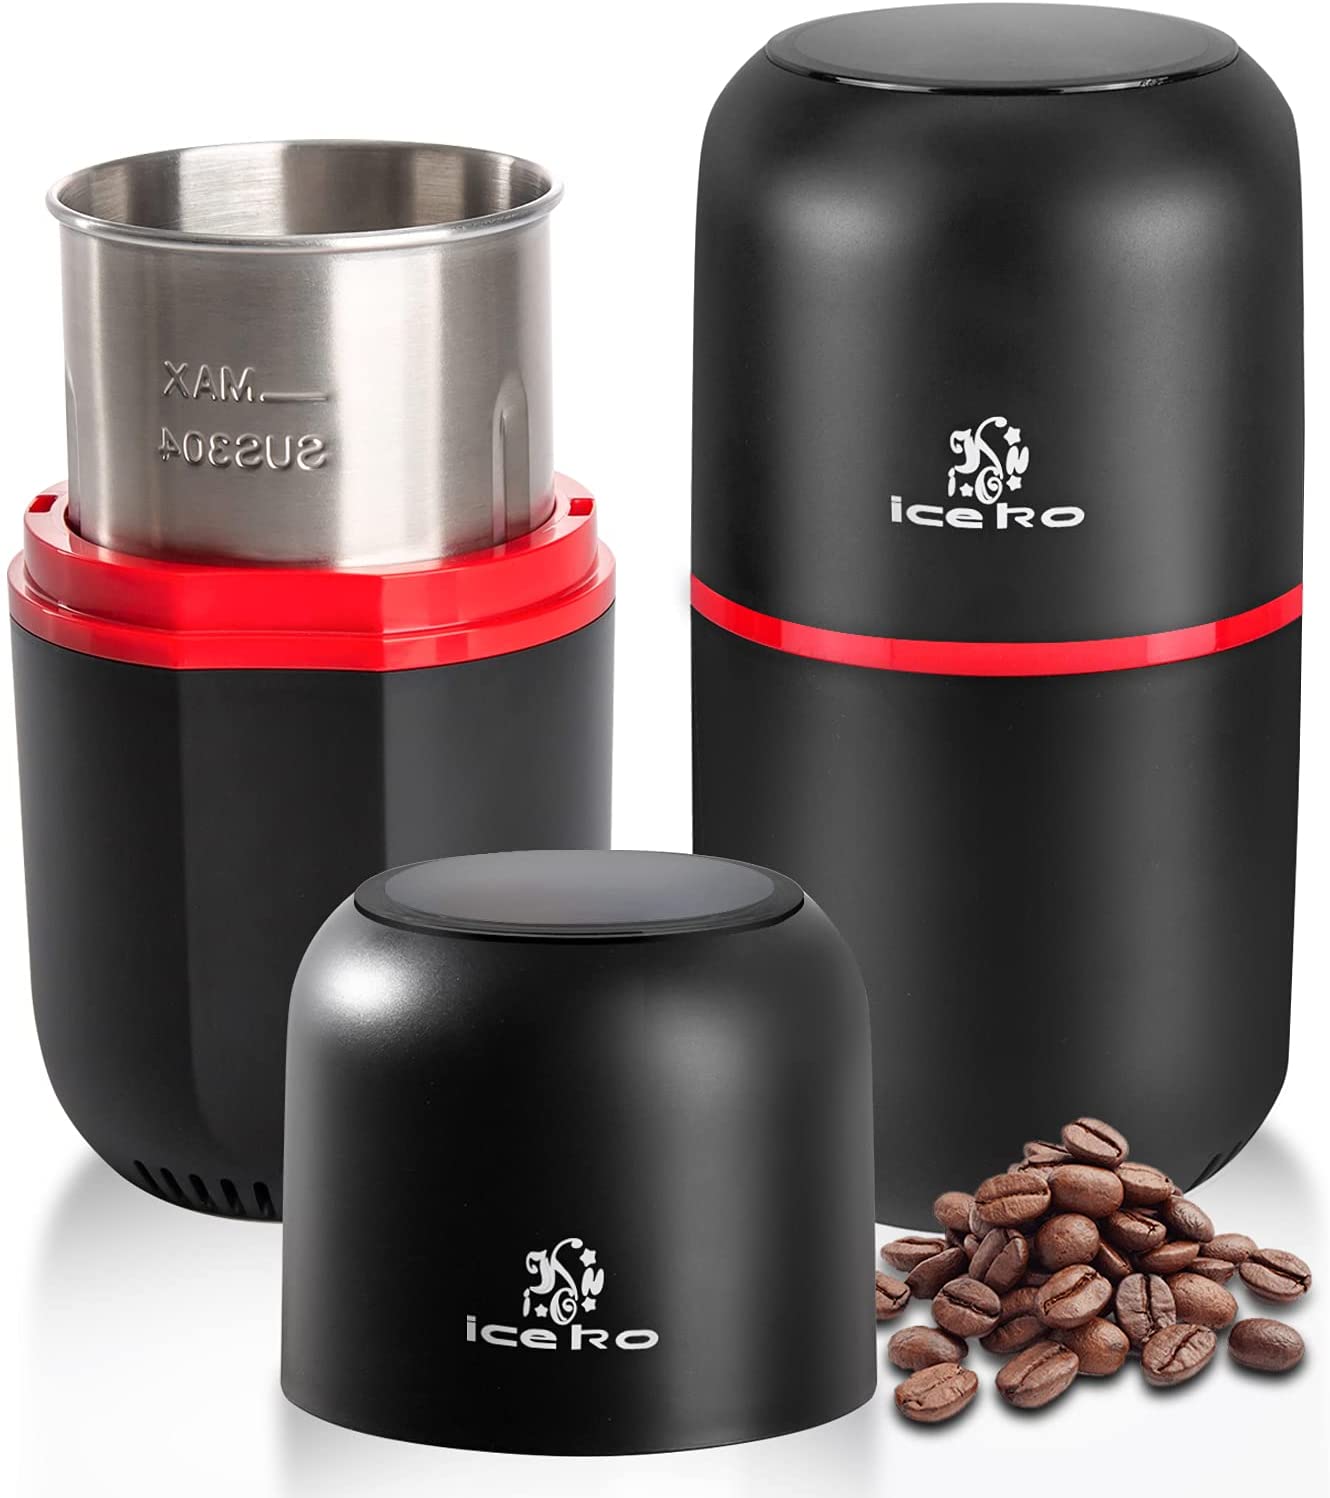 ICEKO KN ICEKO-KN Electric Coffee Grinder and Spice Mill in One (150 Watt, 120 g Capacity, 30,000 RPM, Stainless Steel, Safety Lid), Espresso Grinder, Black